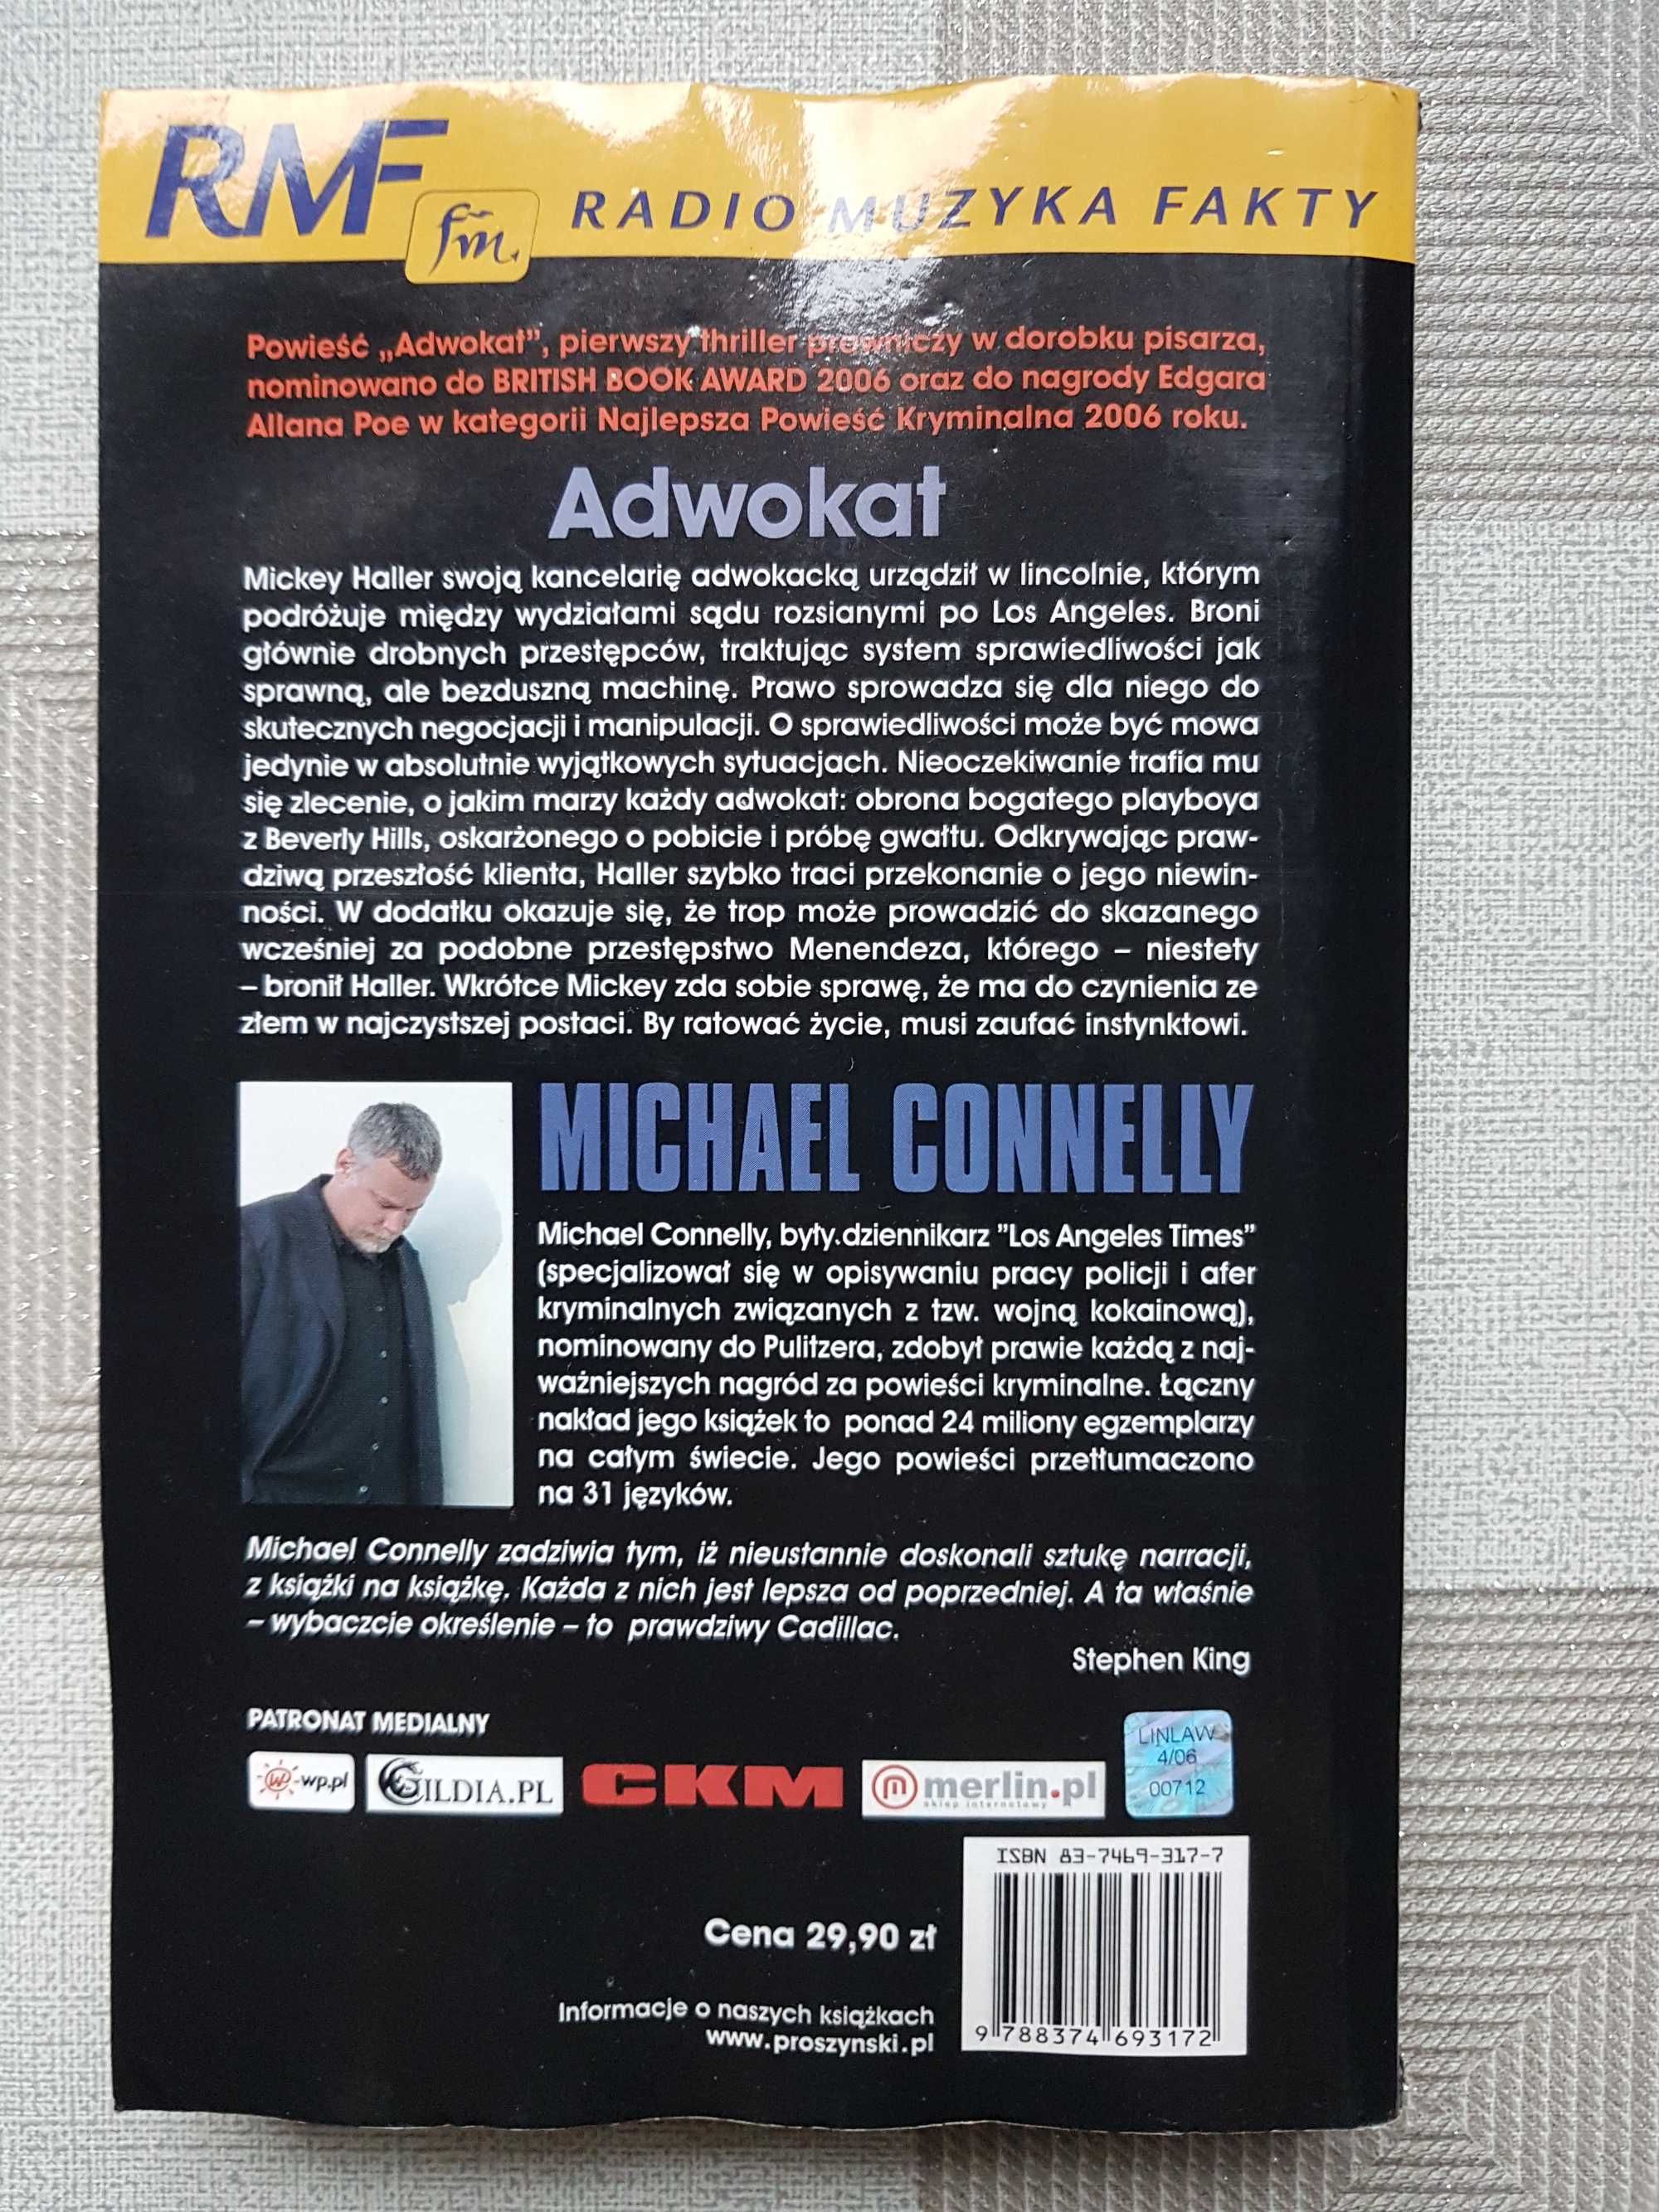 Adwokat - Michael connelly